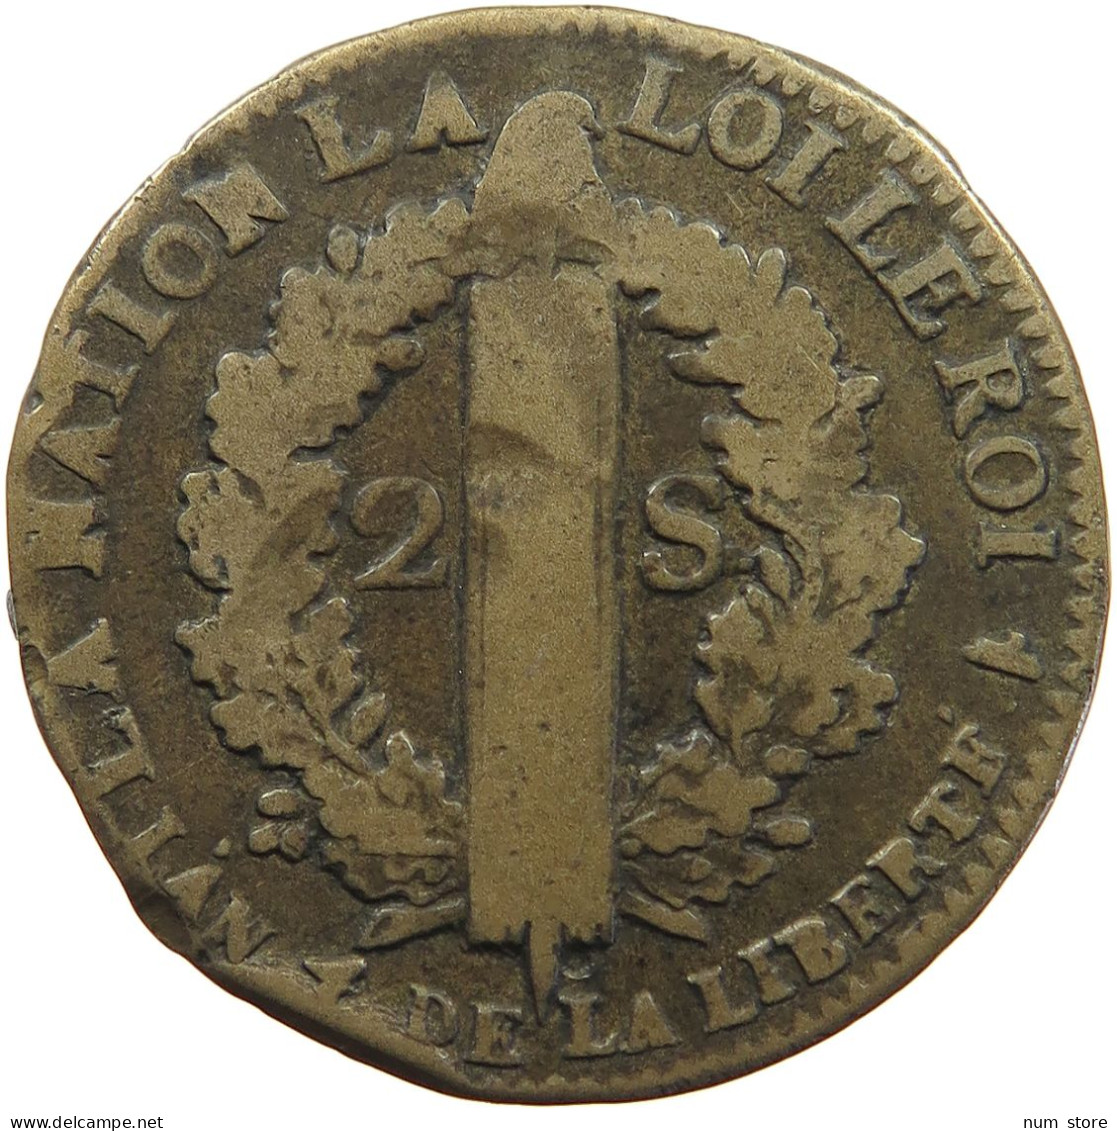 FRANCE 2 SOLS 1792 W Louis XVI. (1774-1793) #t001 0291 - 1791-1792 Constitution (An I)